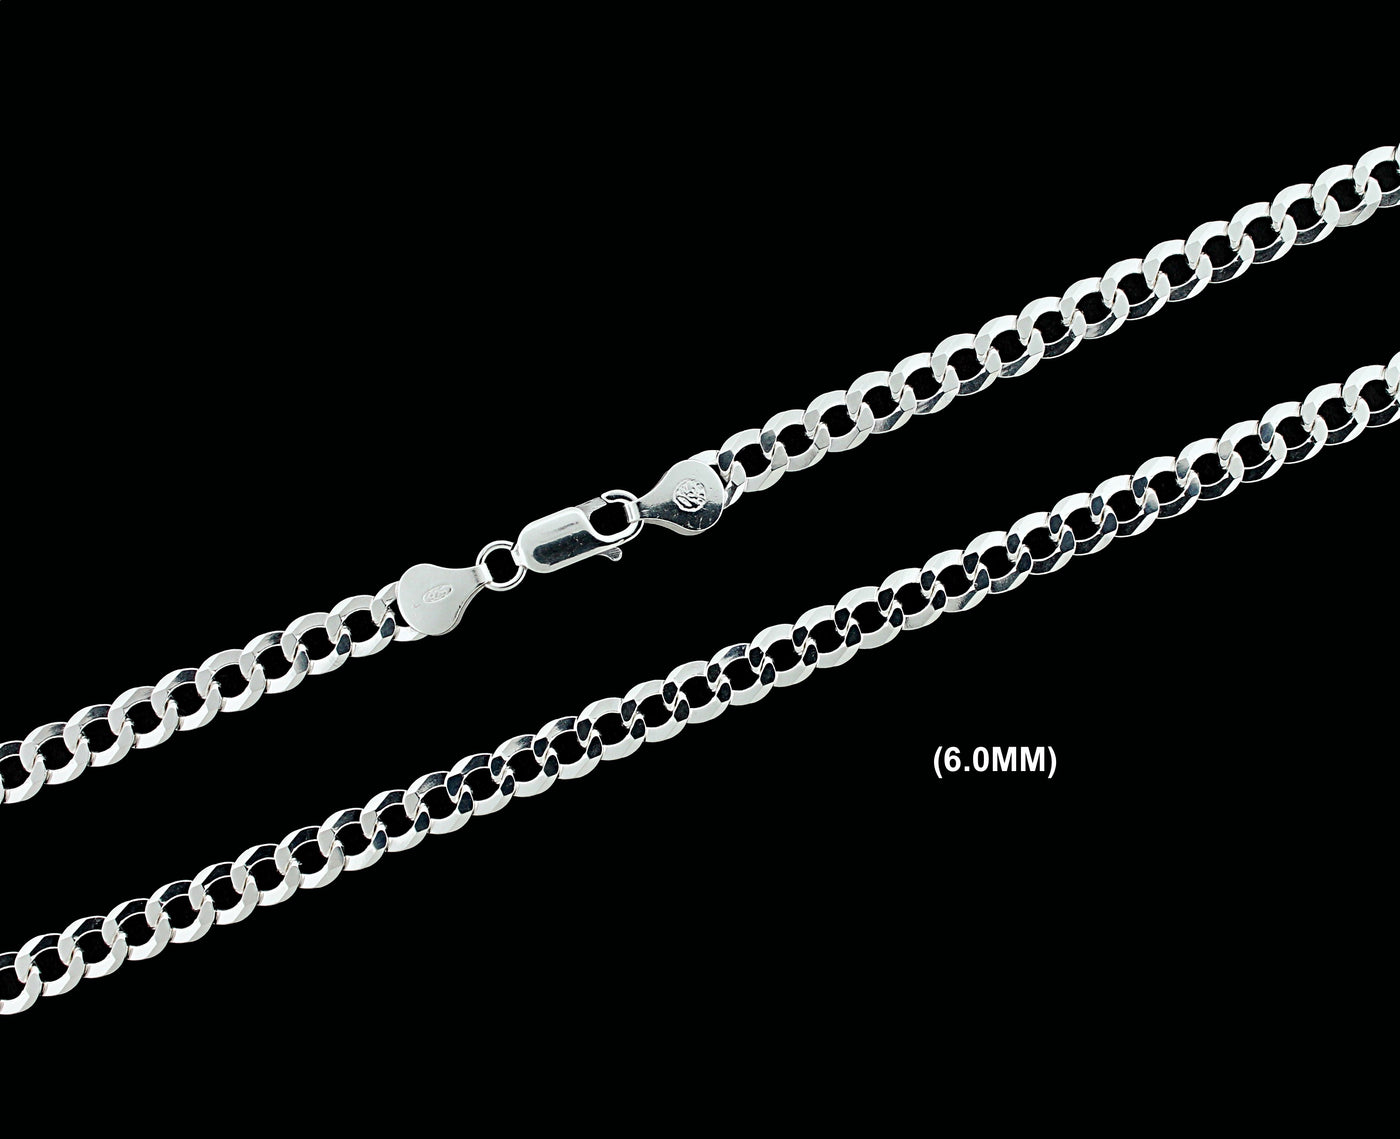 6MM SOLID 925 Sterling Silver Cuban Curb Link Chain Necklace or Bracelet ITALY